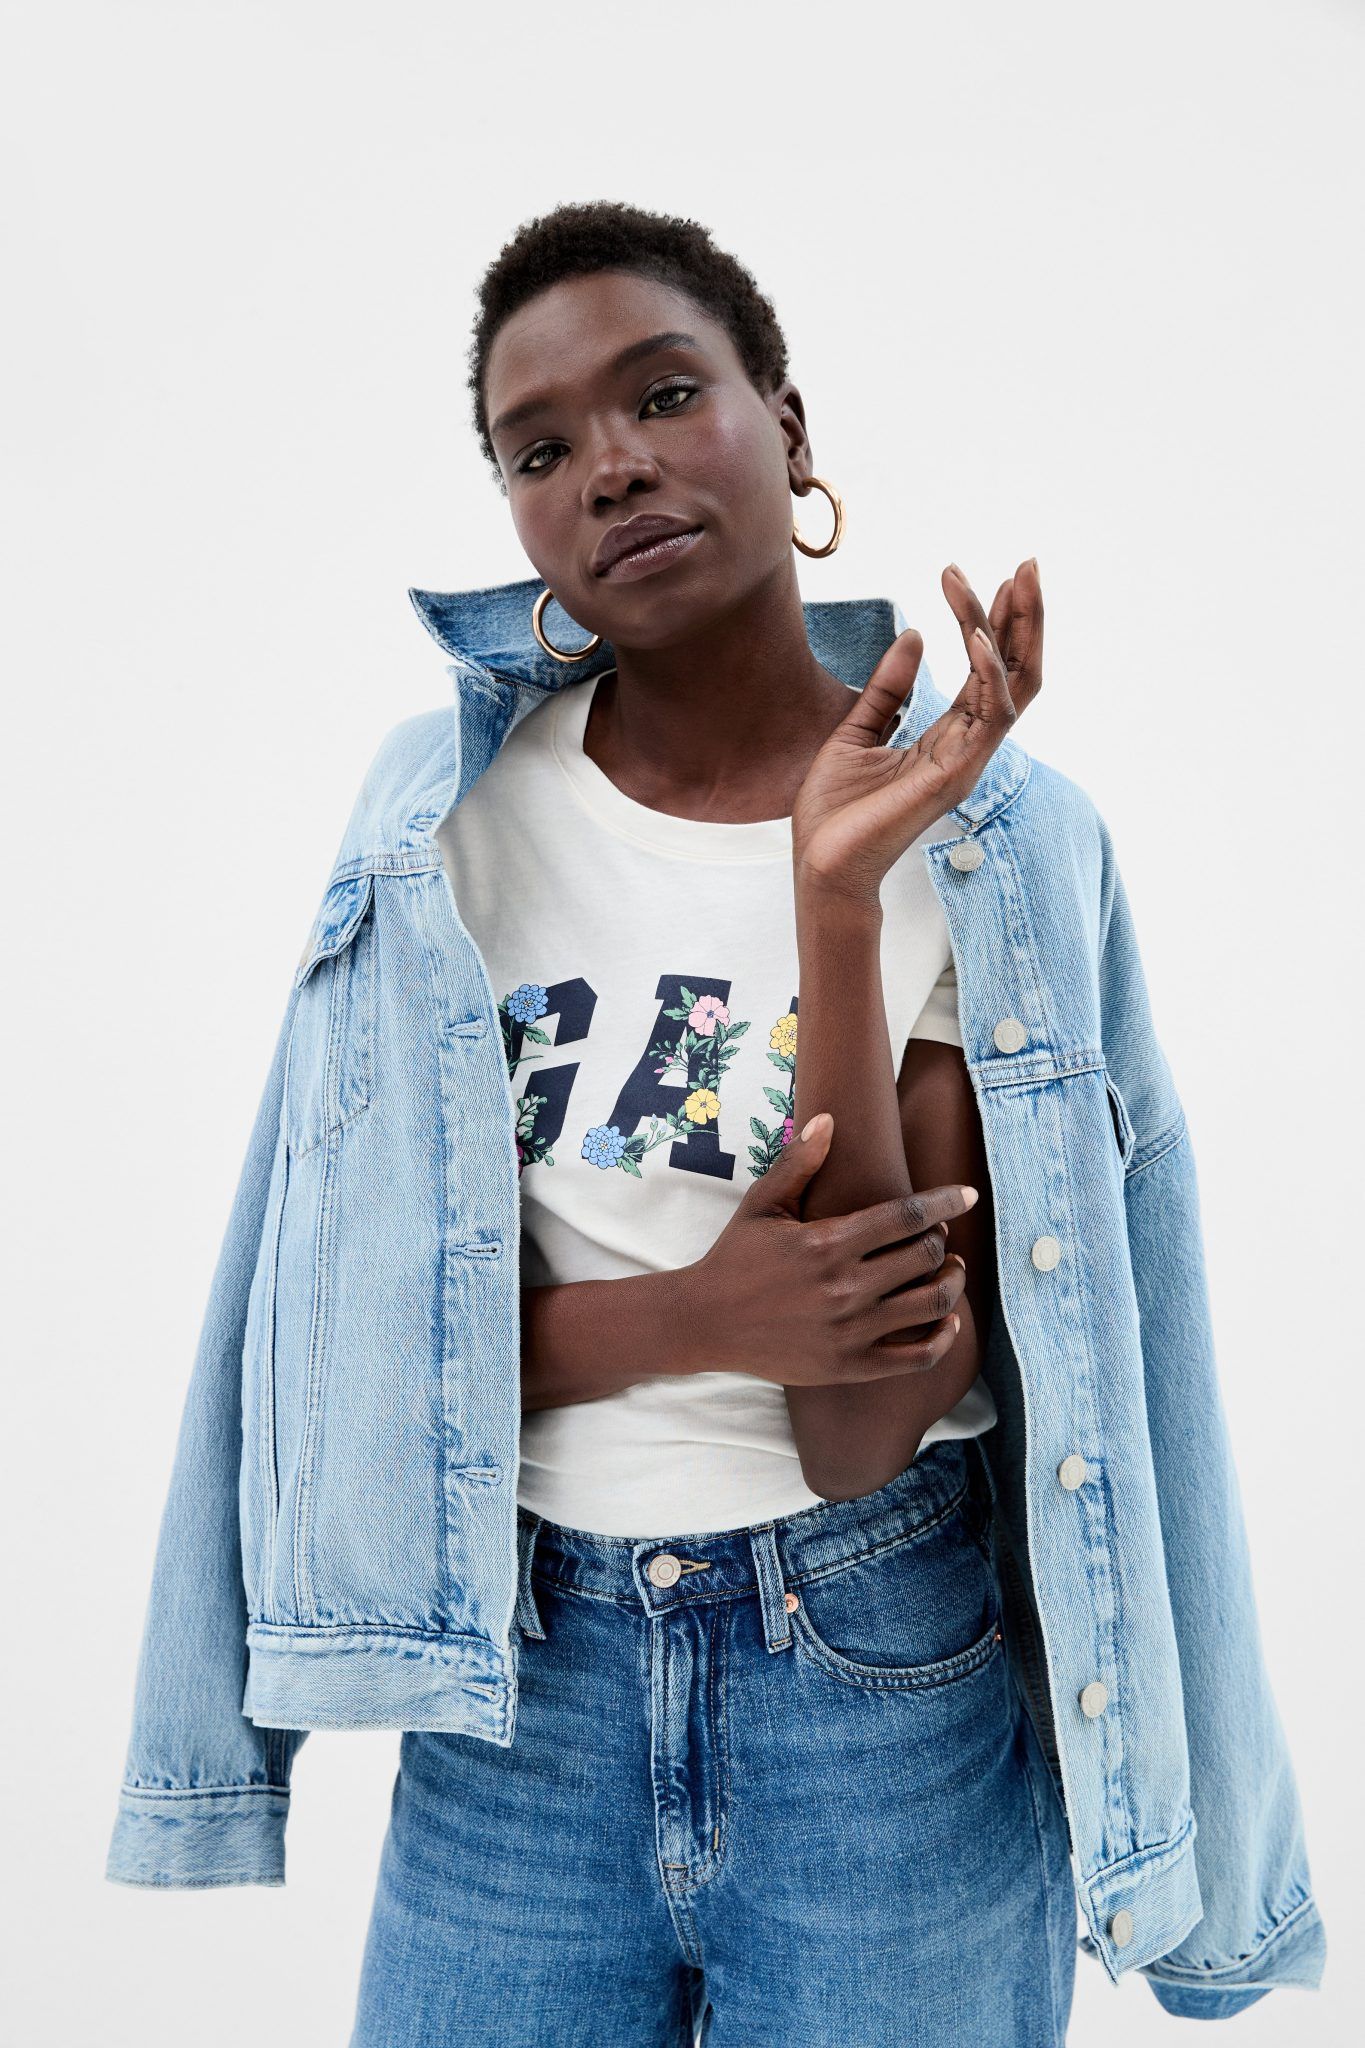 Gap is Back: In conversation with Head of Denim Design, Crystal ...